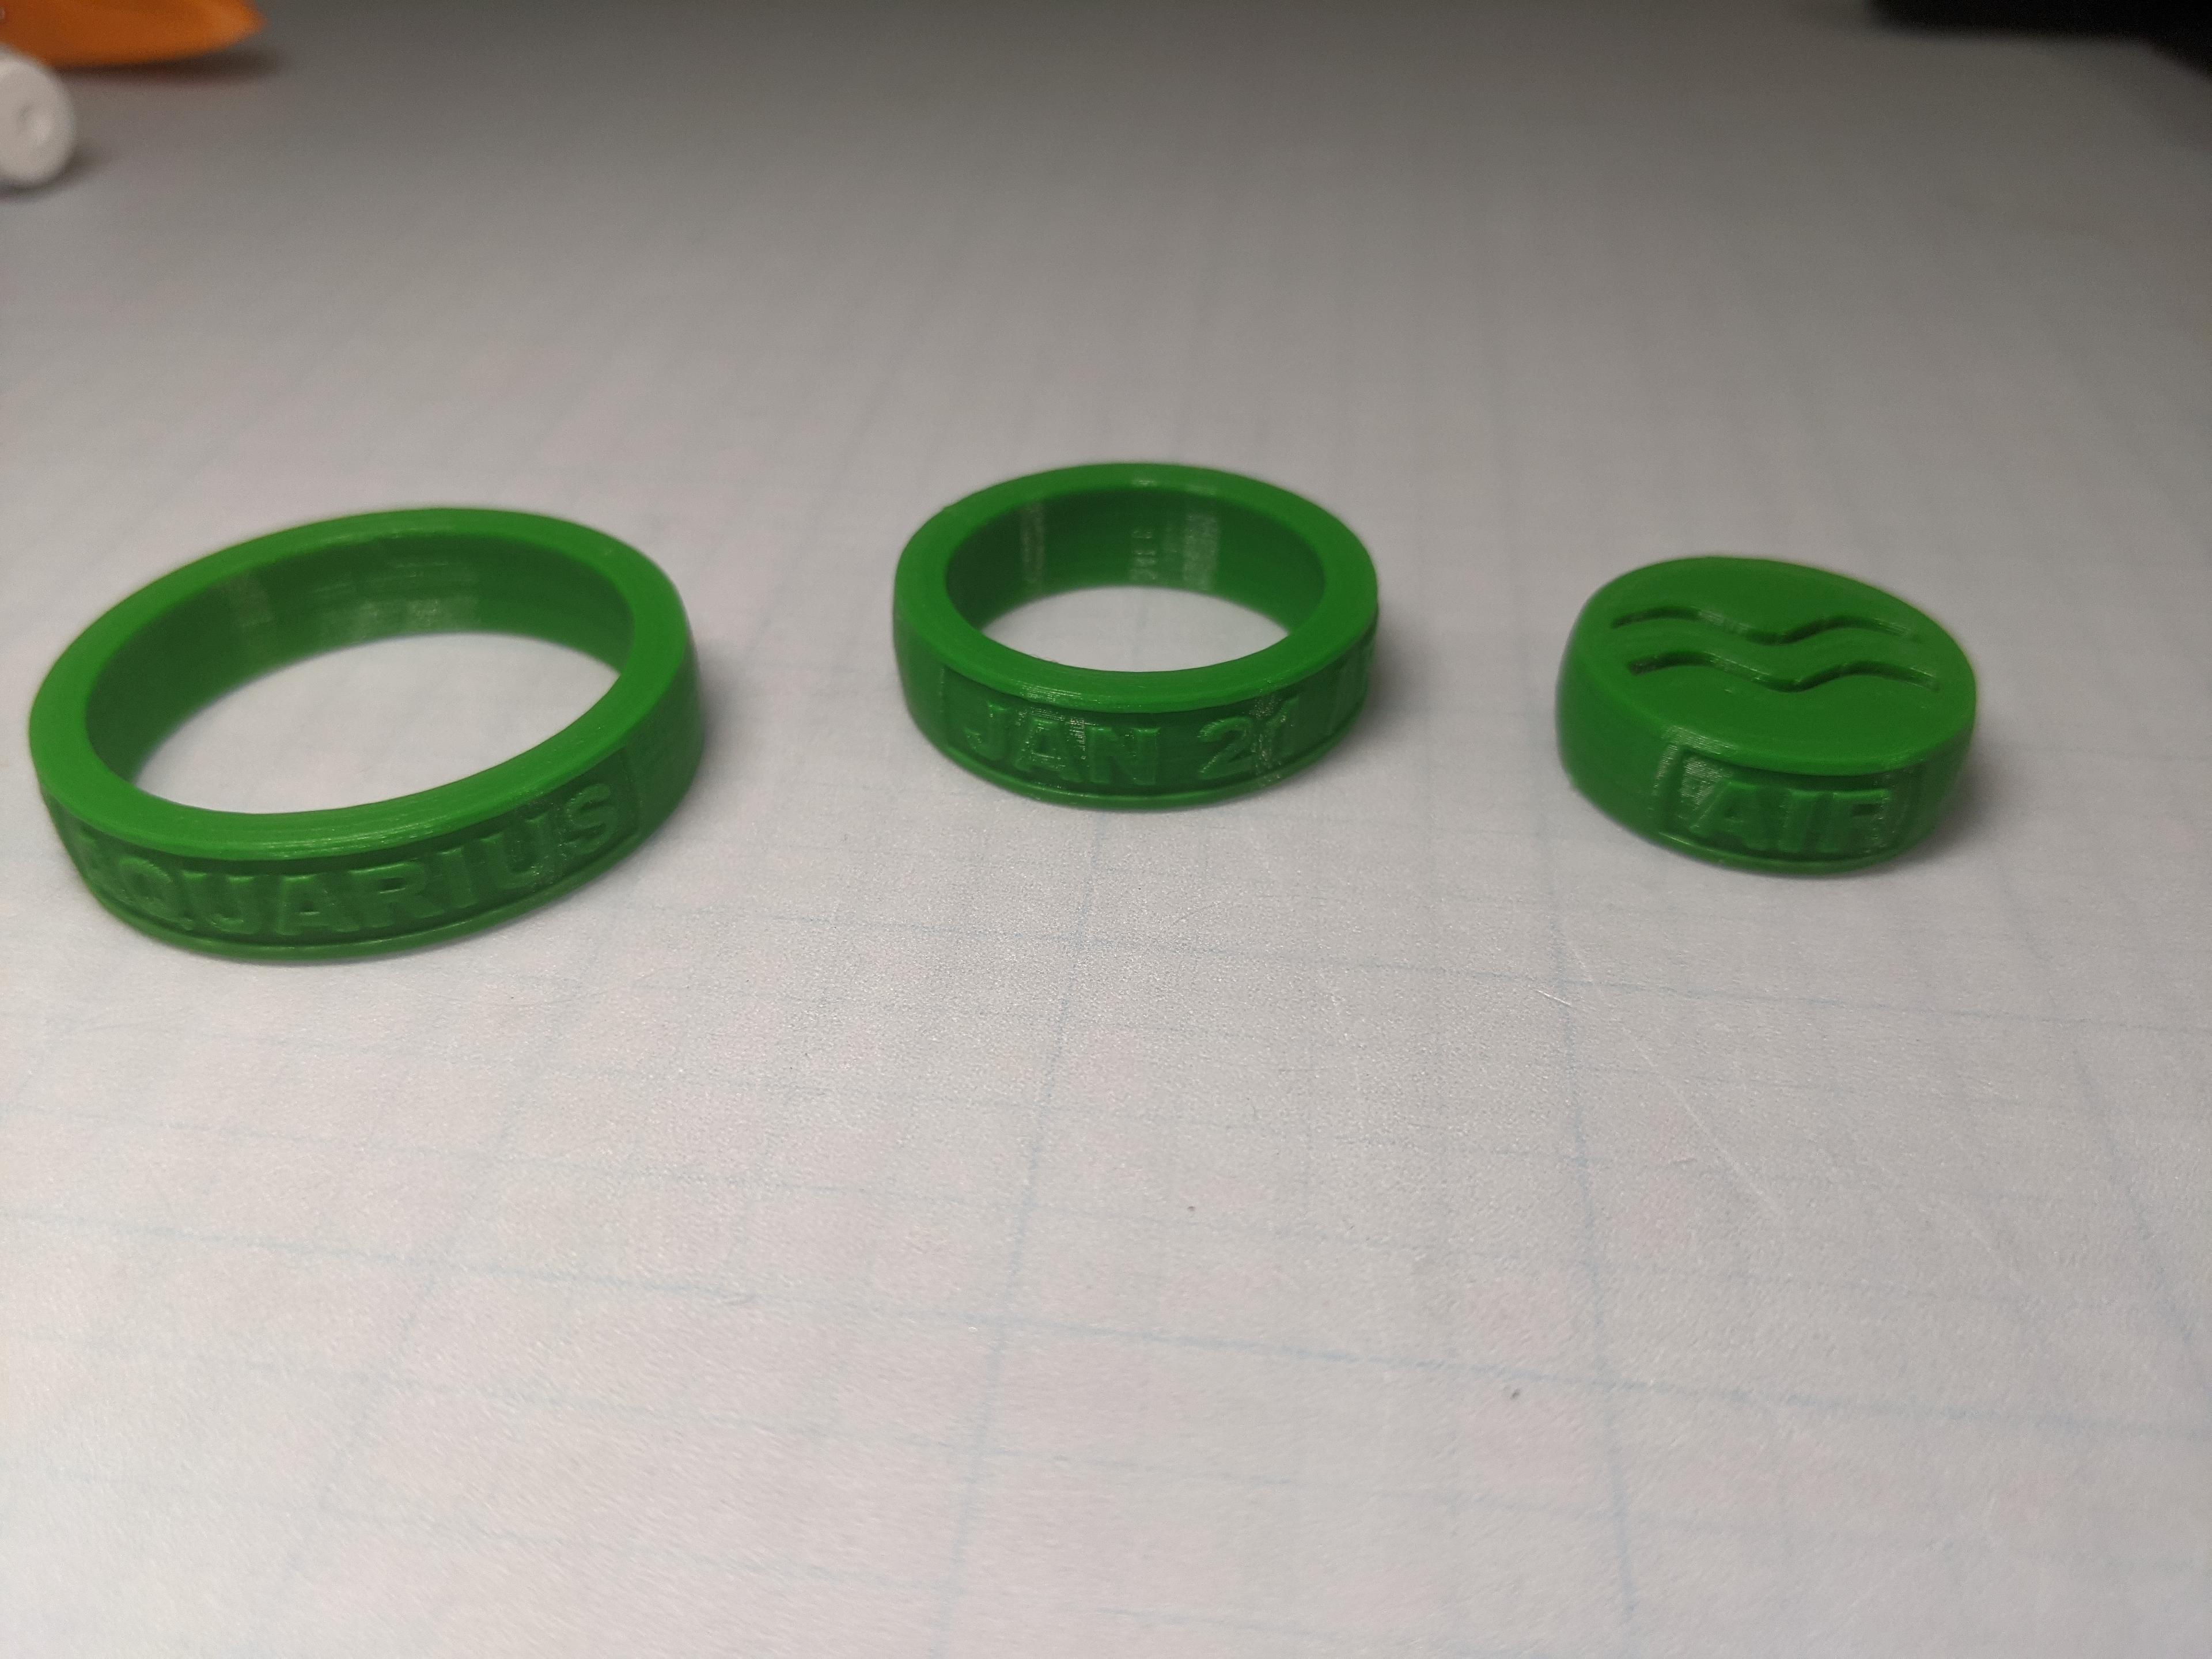 ZodiacSignKeyChainCollection.stl - The rings came apart really easily.  Needs nubs on the rings to keep them together as they spin. - 3d model